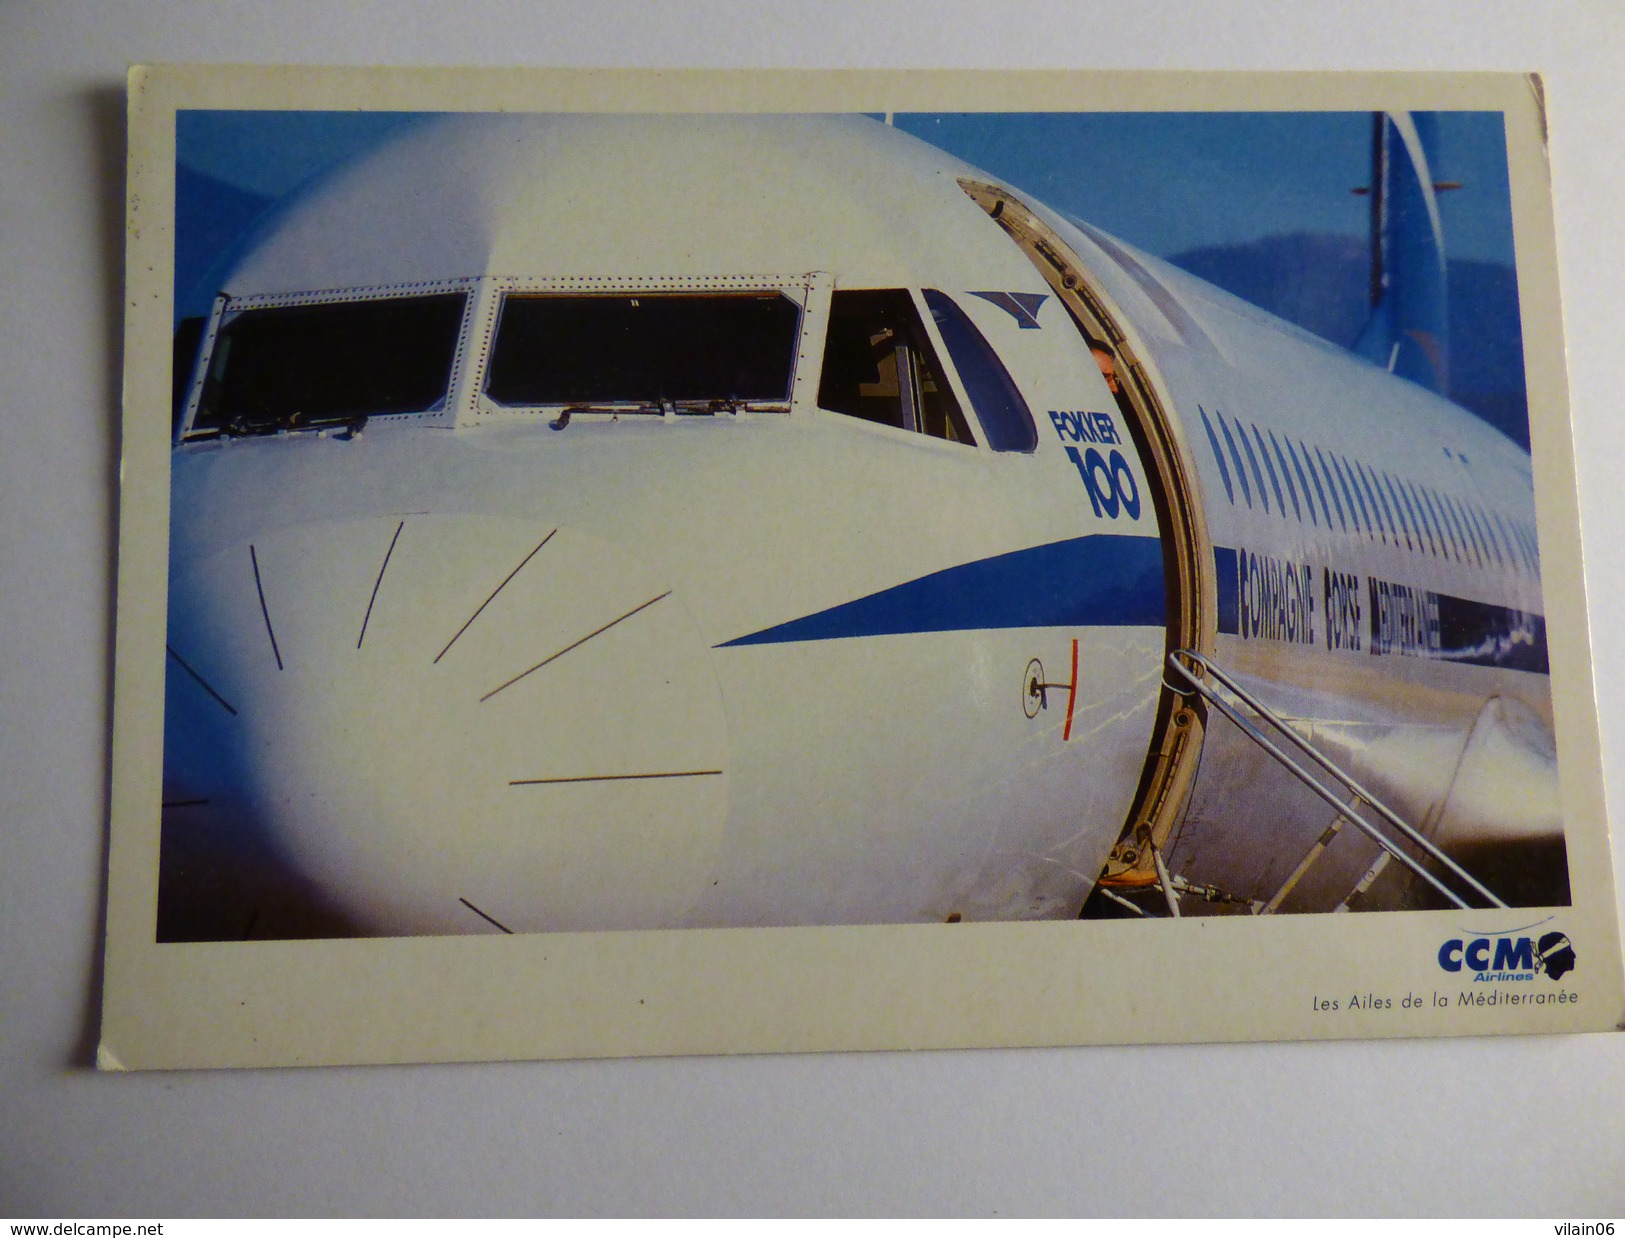 AIRLINE ISSUE / CARTE COMPAGNIE     CCM AIRLINES / COMPAGNIE CORSE MEDITERRANEE    FOKKER 100 - 1946-....: Ere Moderne